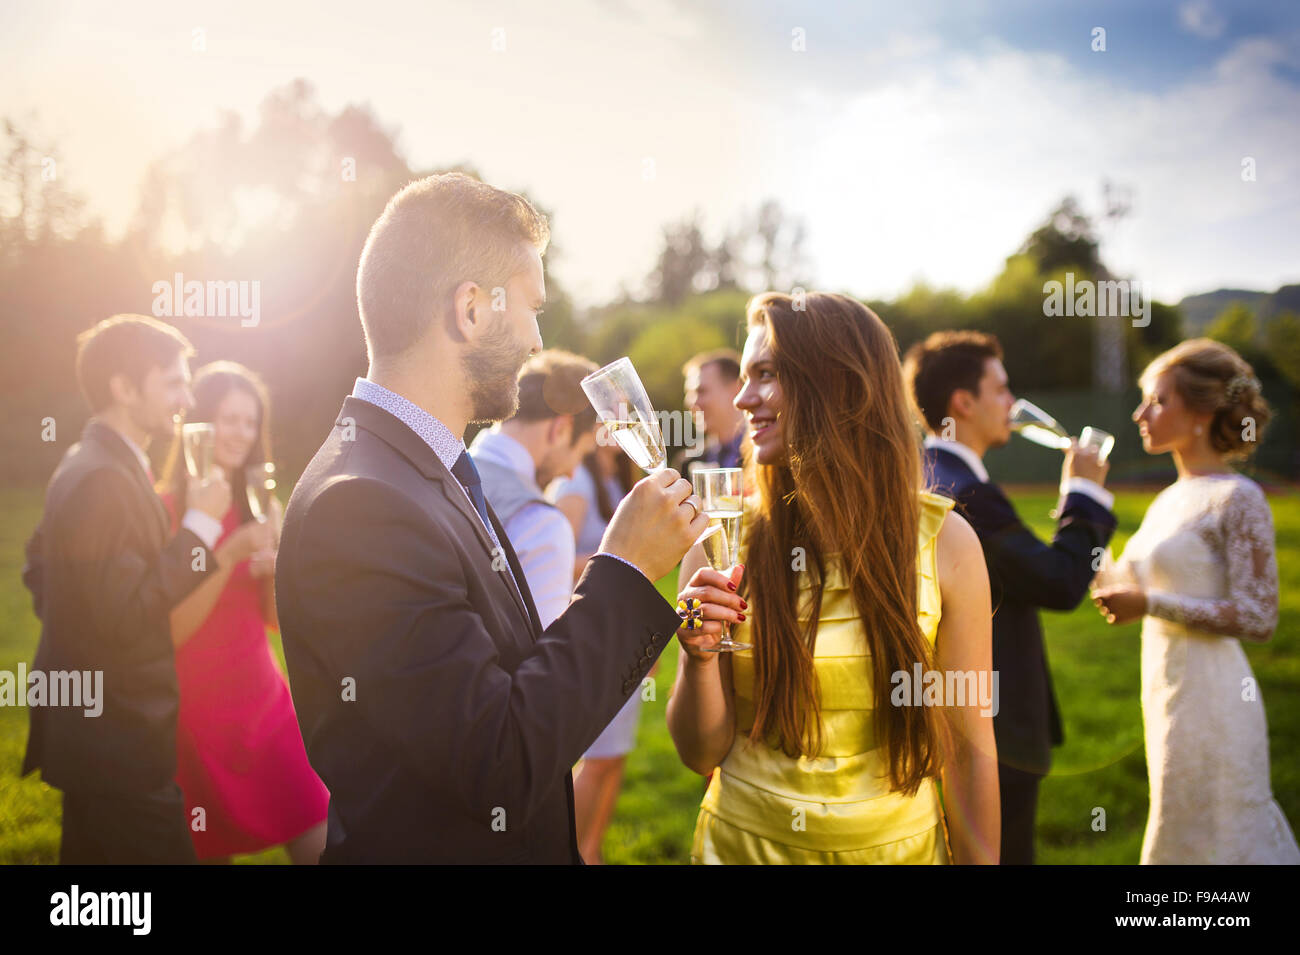 Wedding guests clinking glasses while the newlyweds drinking champagne in the background Stock Photo